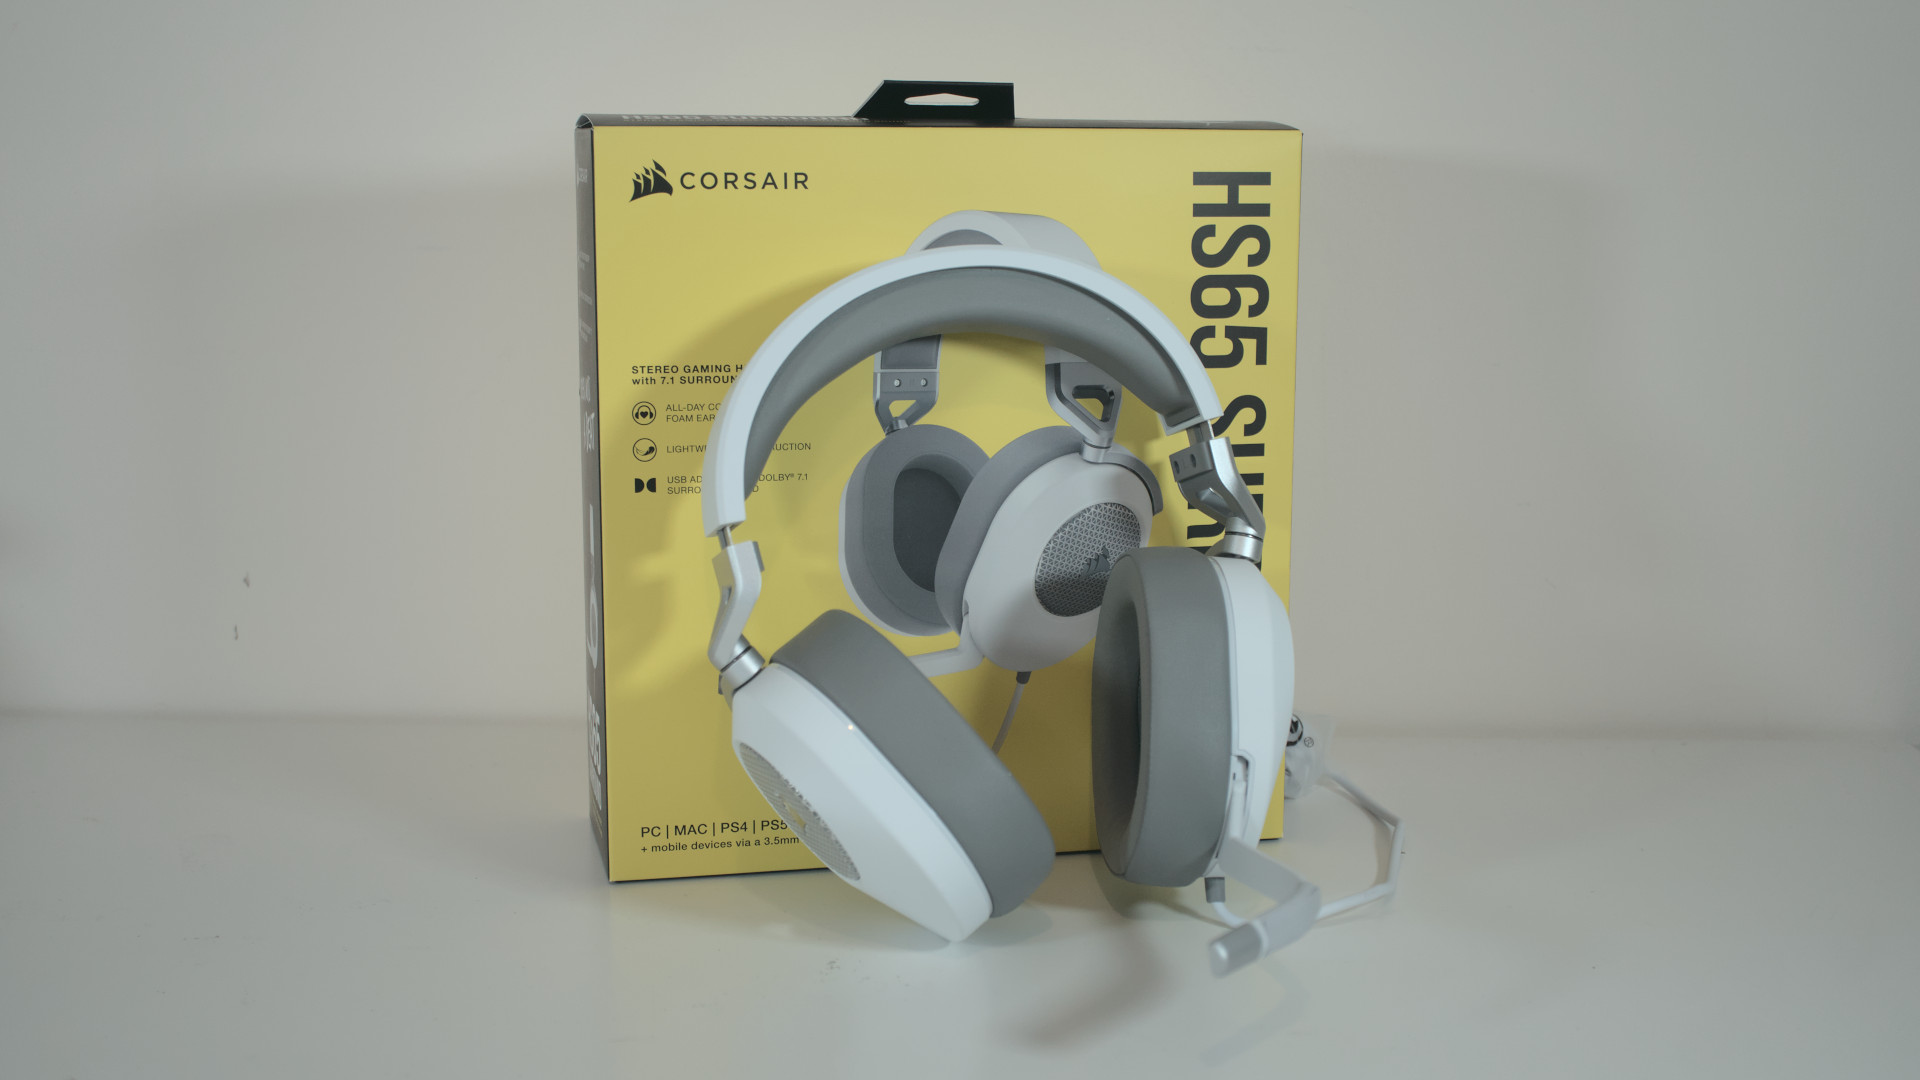 Corsair HS65 Surround review: Great audio at a budget-friendly price